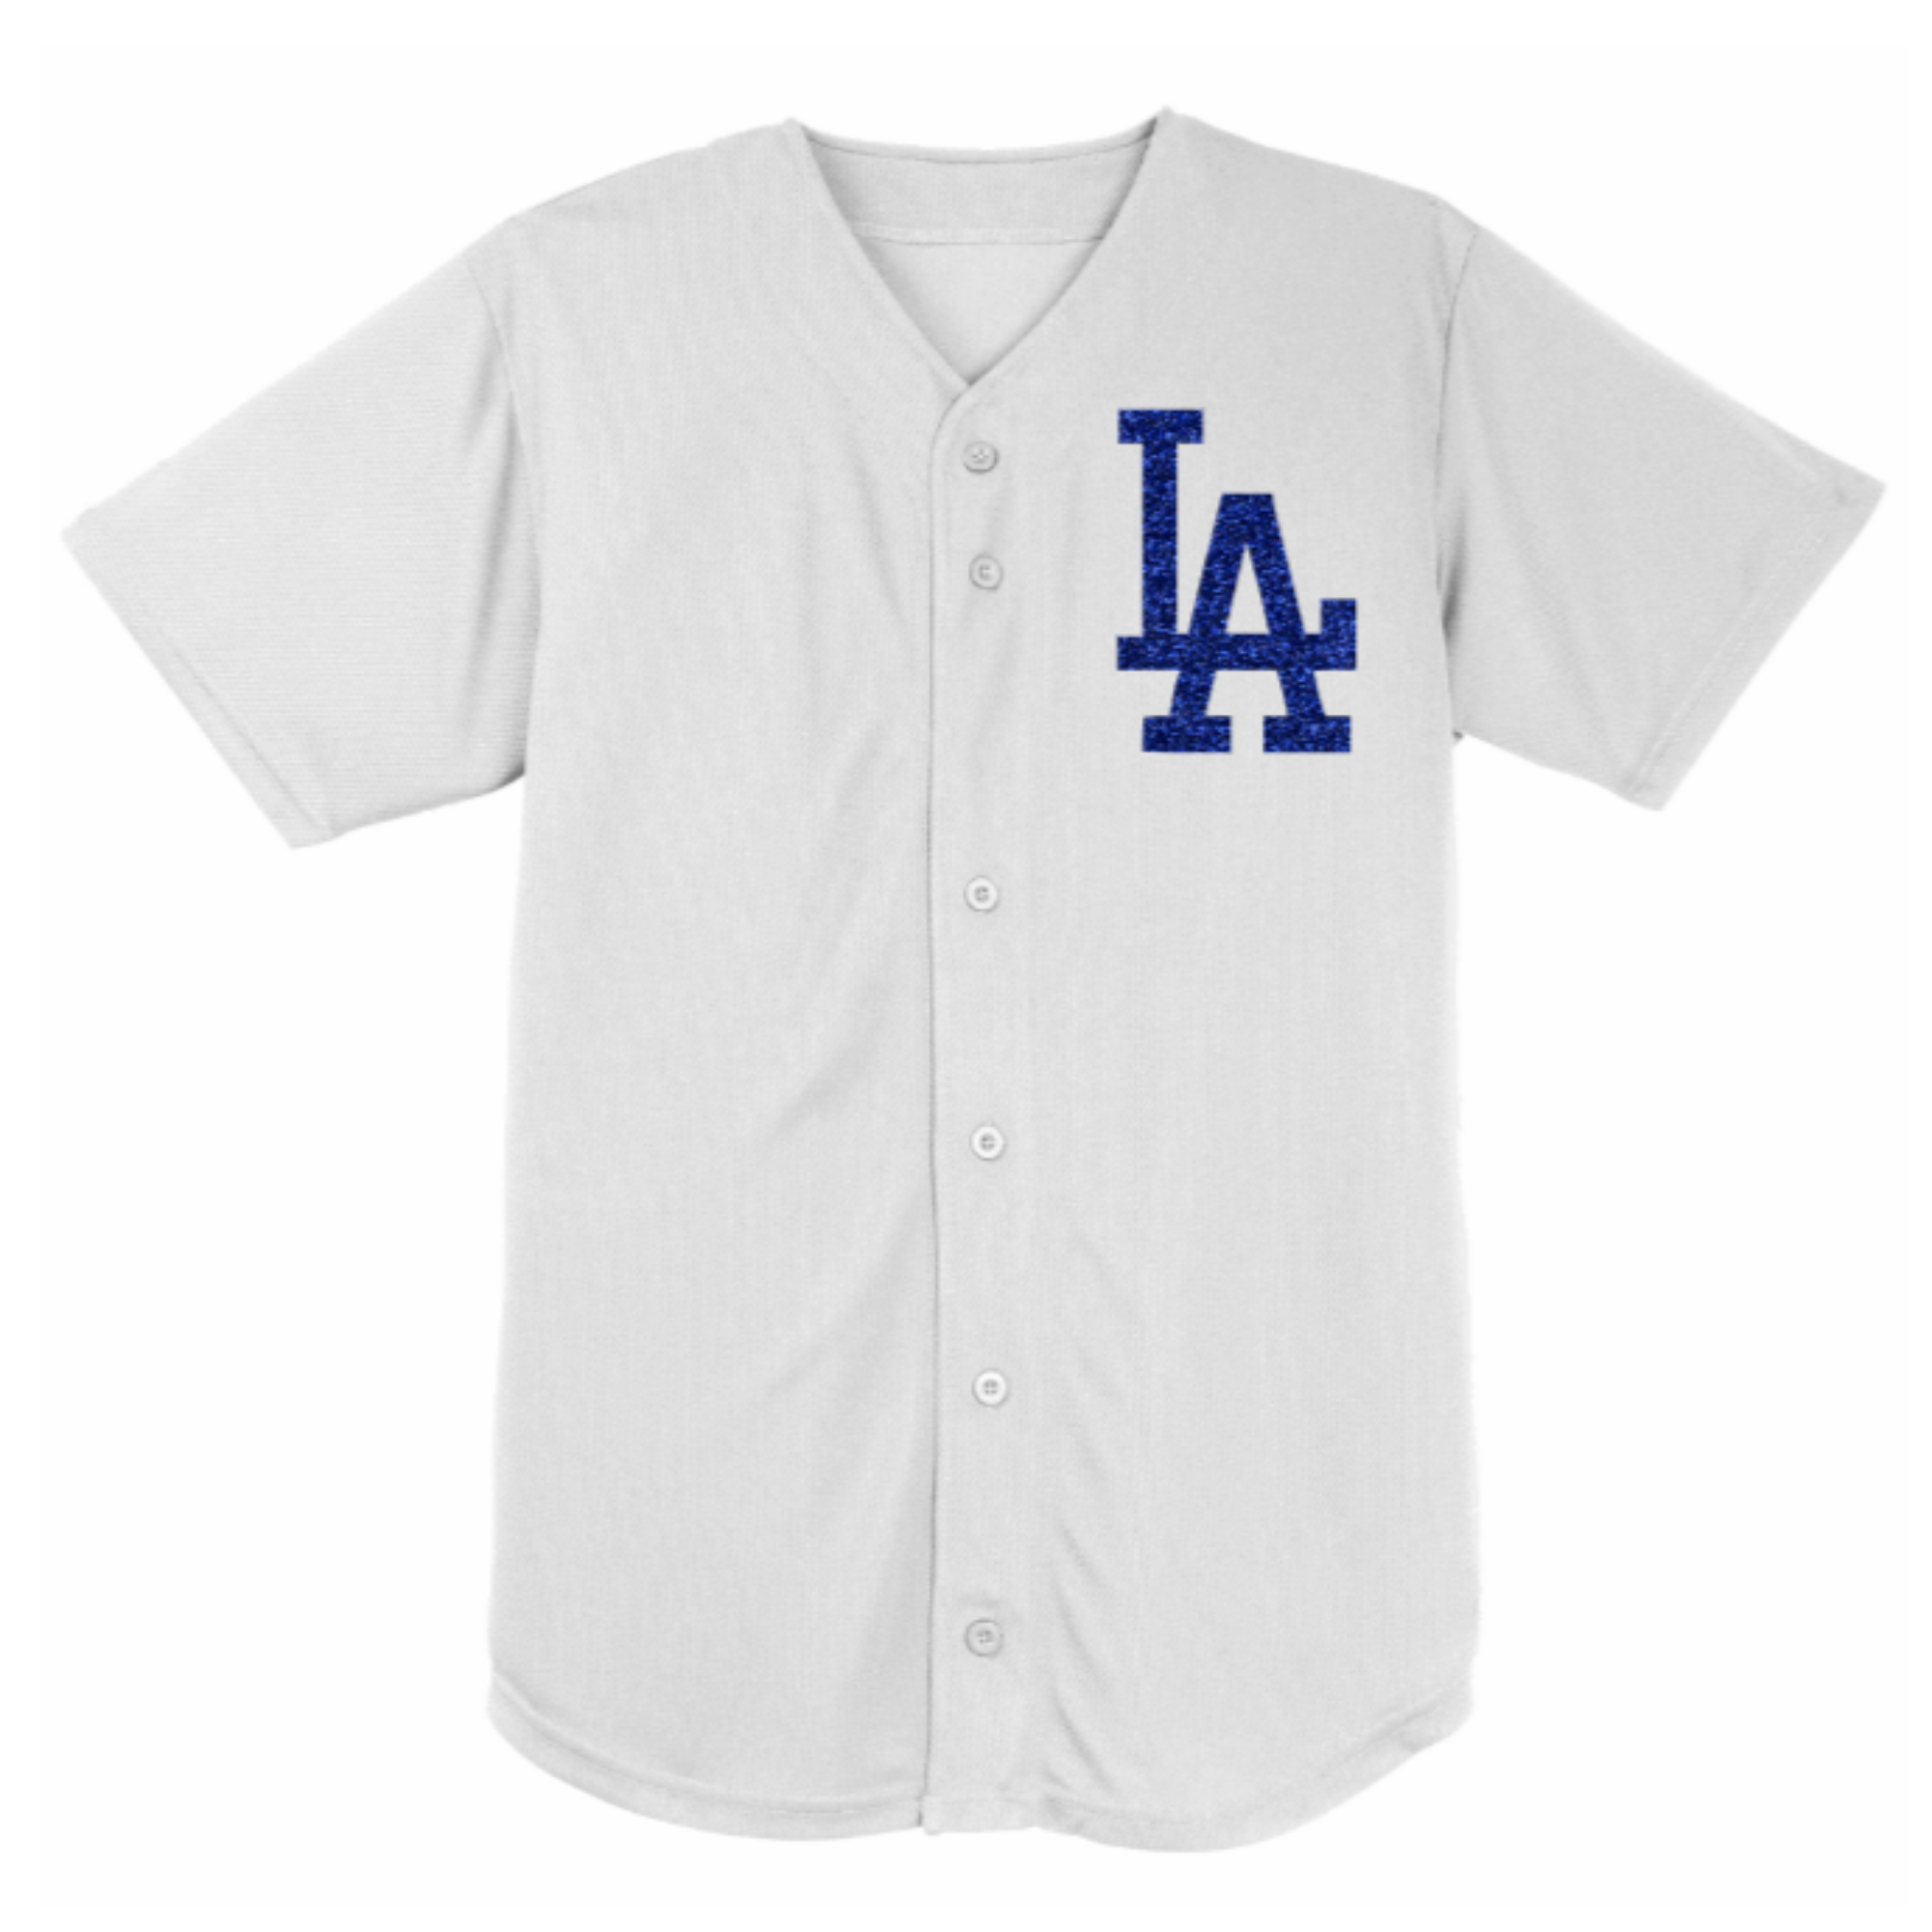 white dodgers jersey outfit women